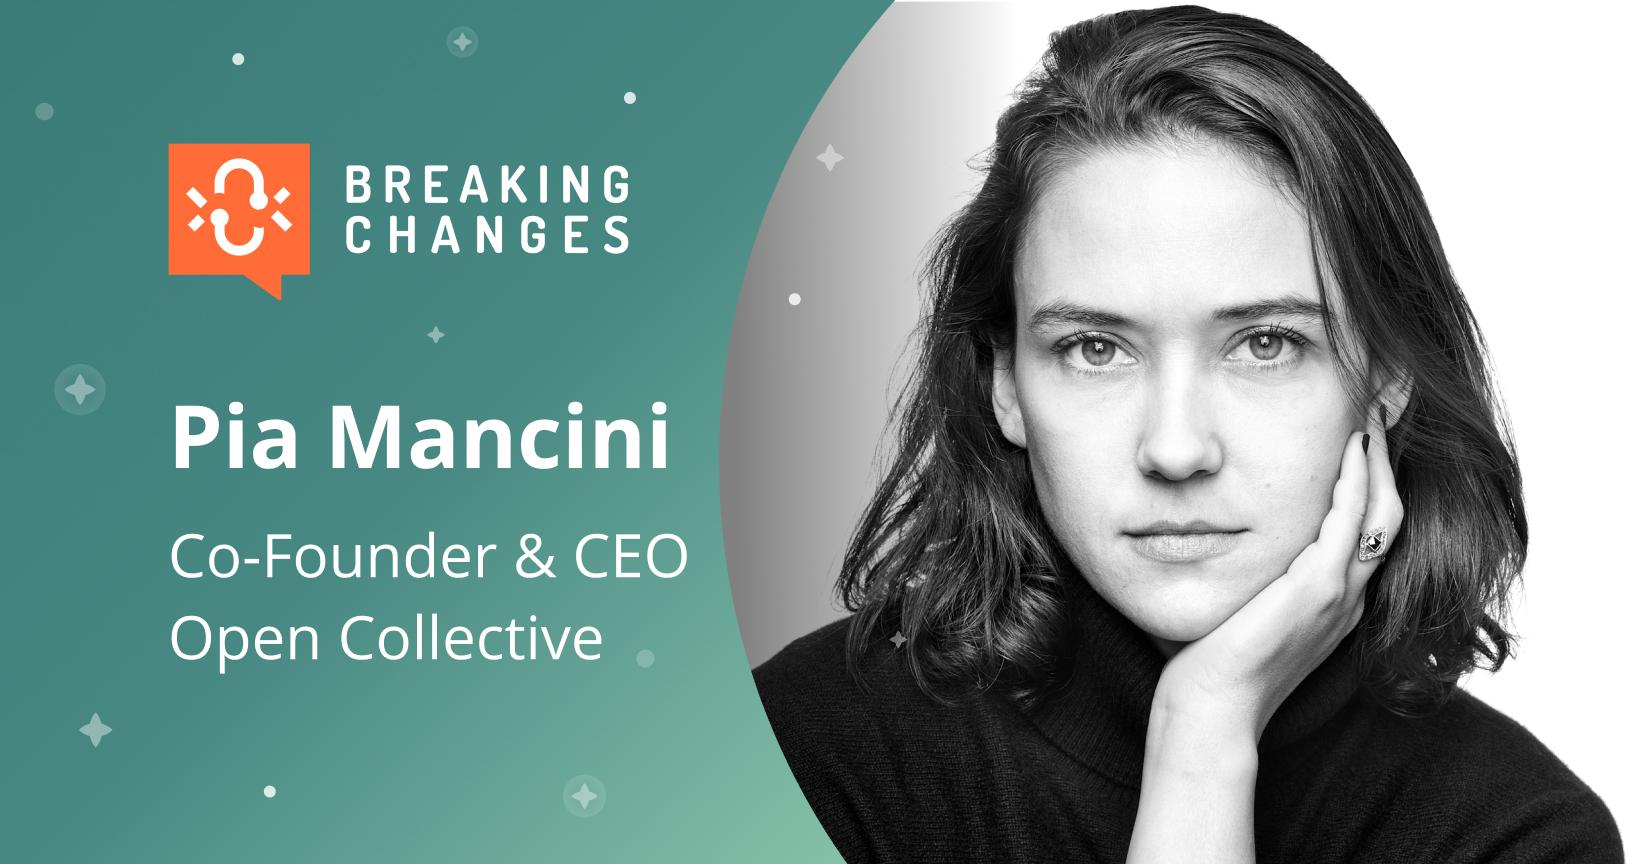 Breaking Changes” with Pia Mancini: defining the next generation